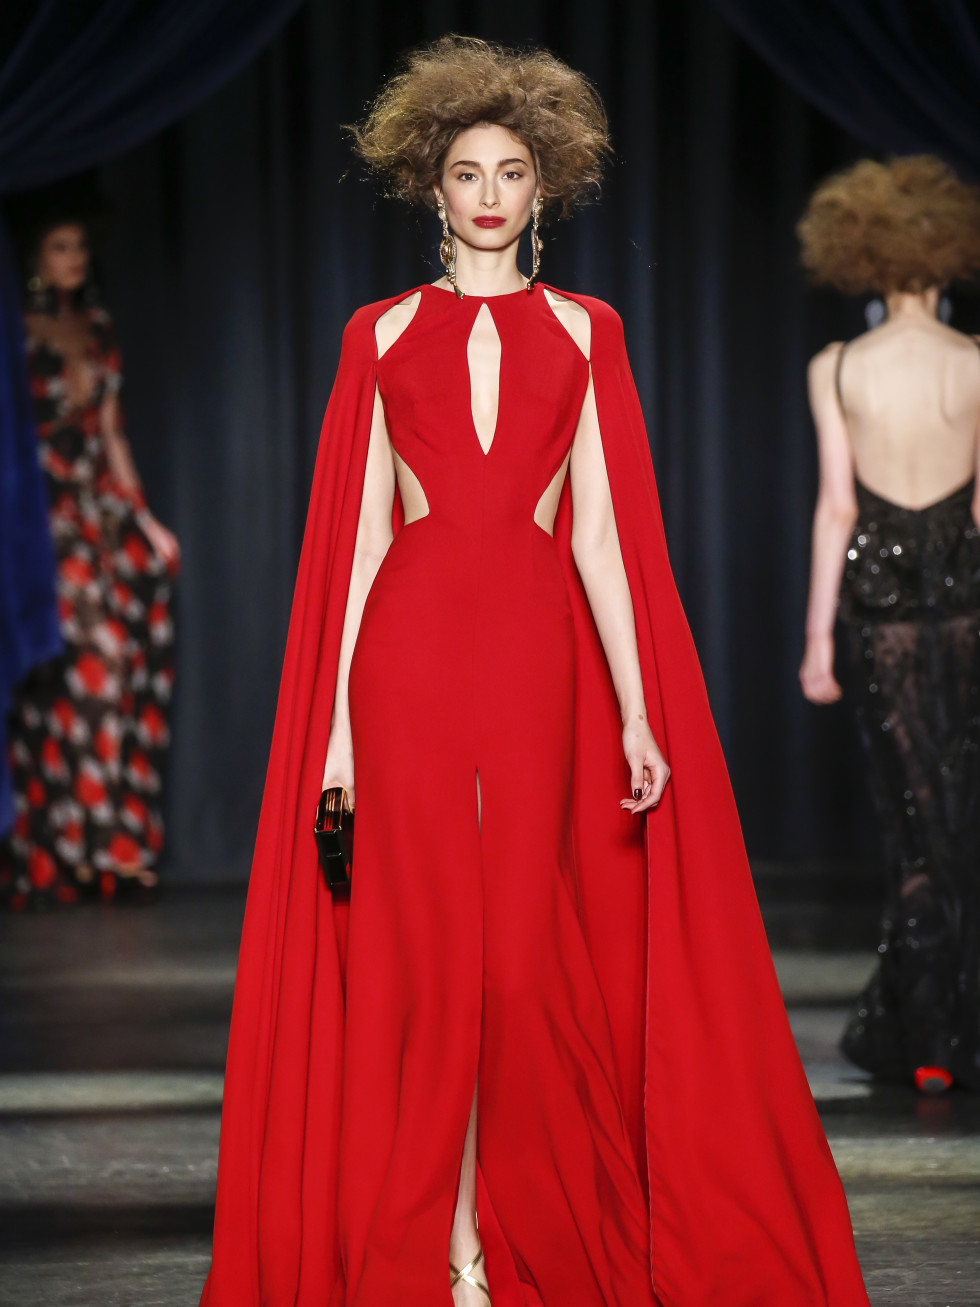 Best gowns from New York Fashion Week are ready for Oscars red carpet ...